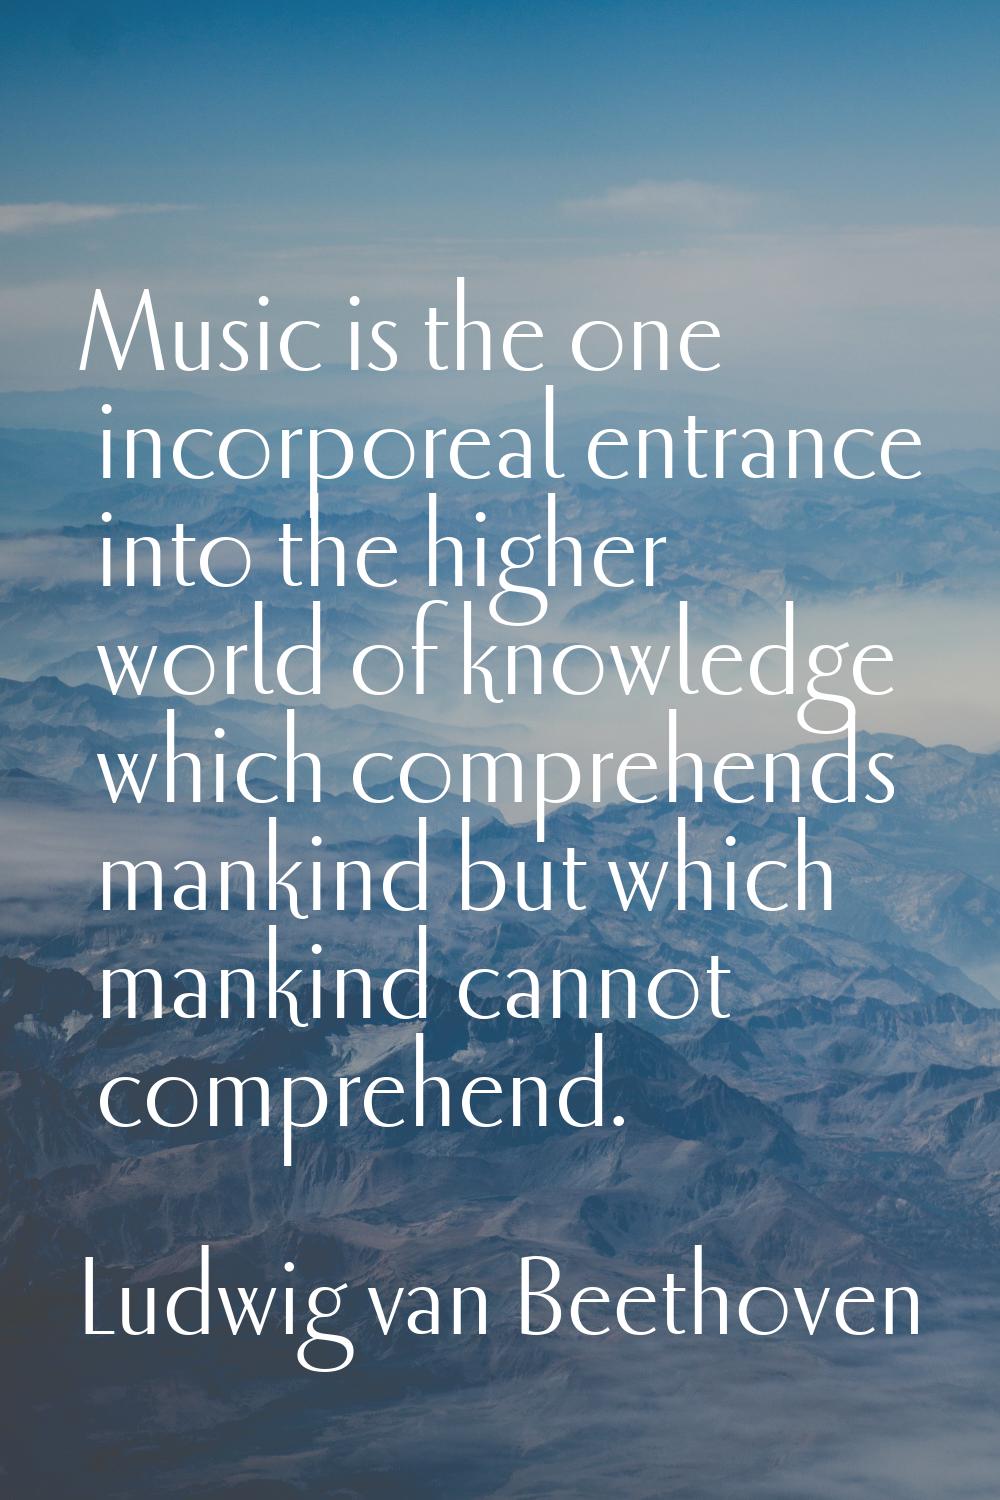 Music is the one incorporeal entrance into the higher world of knowledge which comprehends mankind 